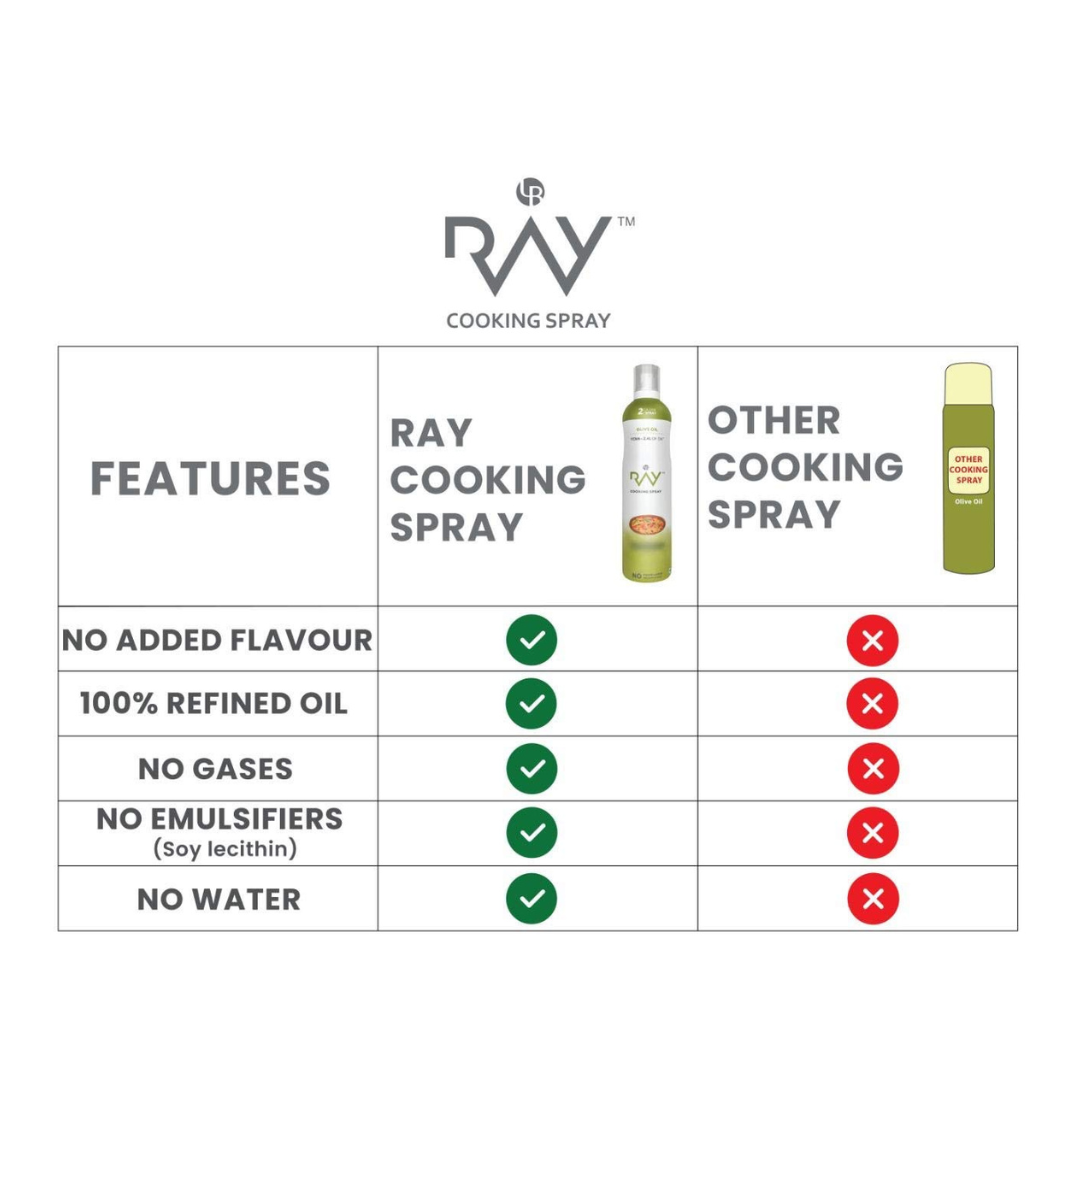 LB RAY Cooking Spray Sunflower Oil - Low-Calorie, 100% Oil Spray, No Gases, Emulsifiers, and Water (200 ml)